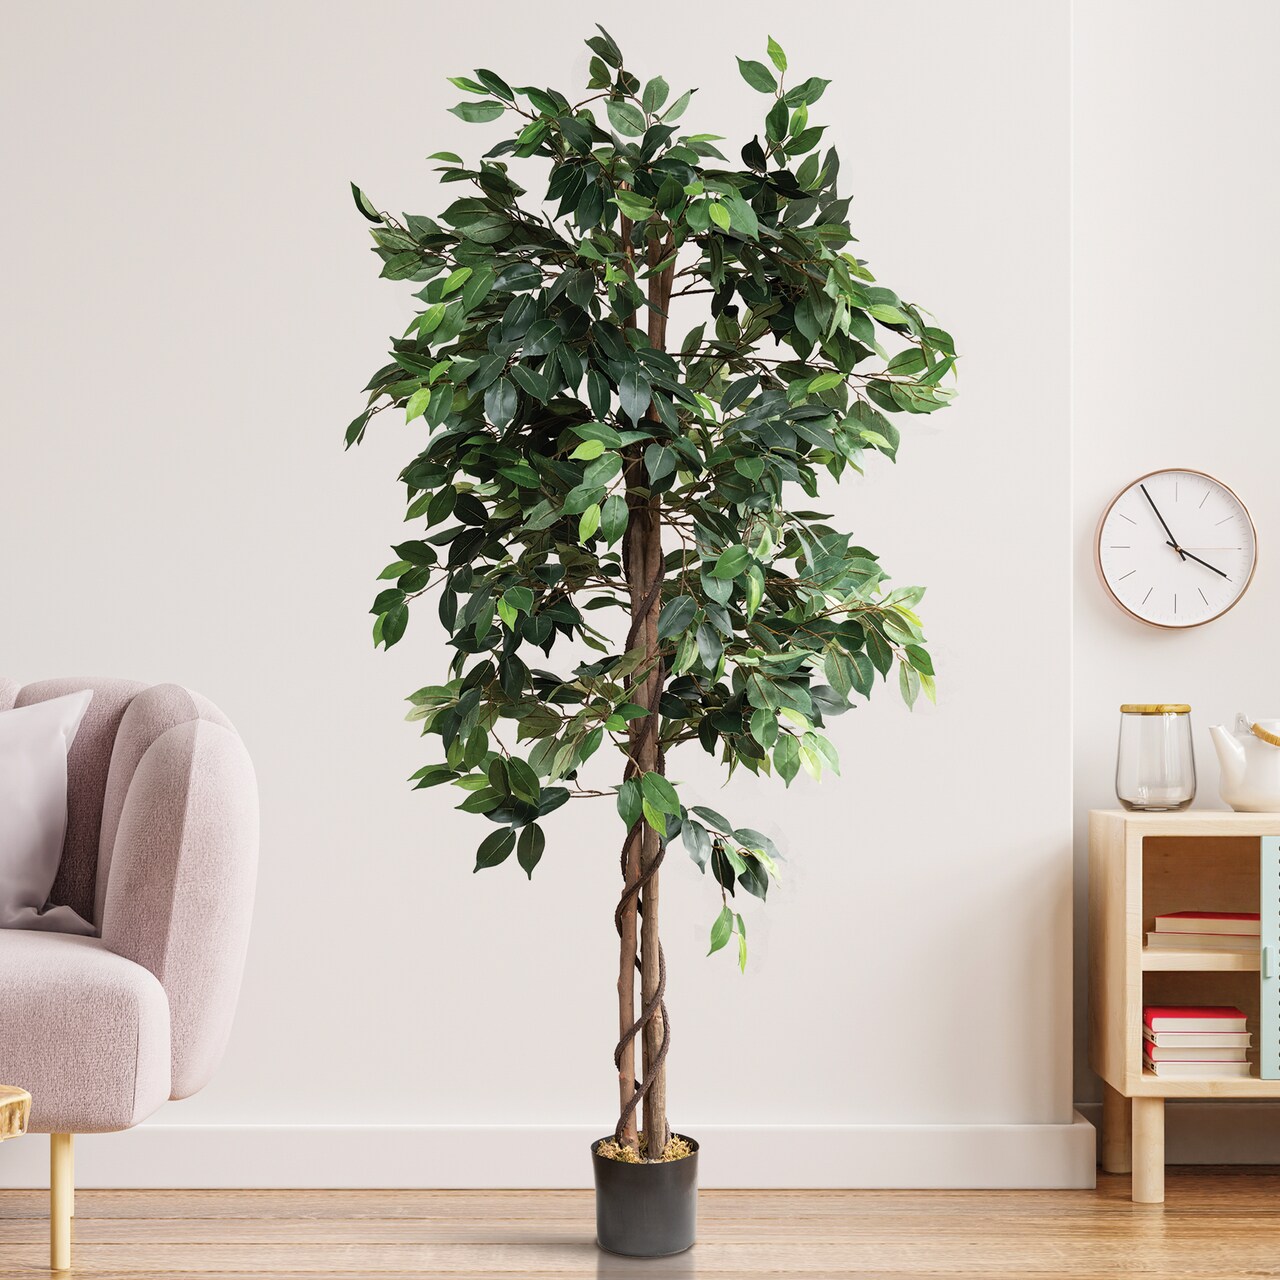 Artificial Trees for Home Decor Indoor - Fake Plants & Faux Plants